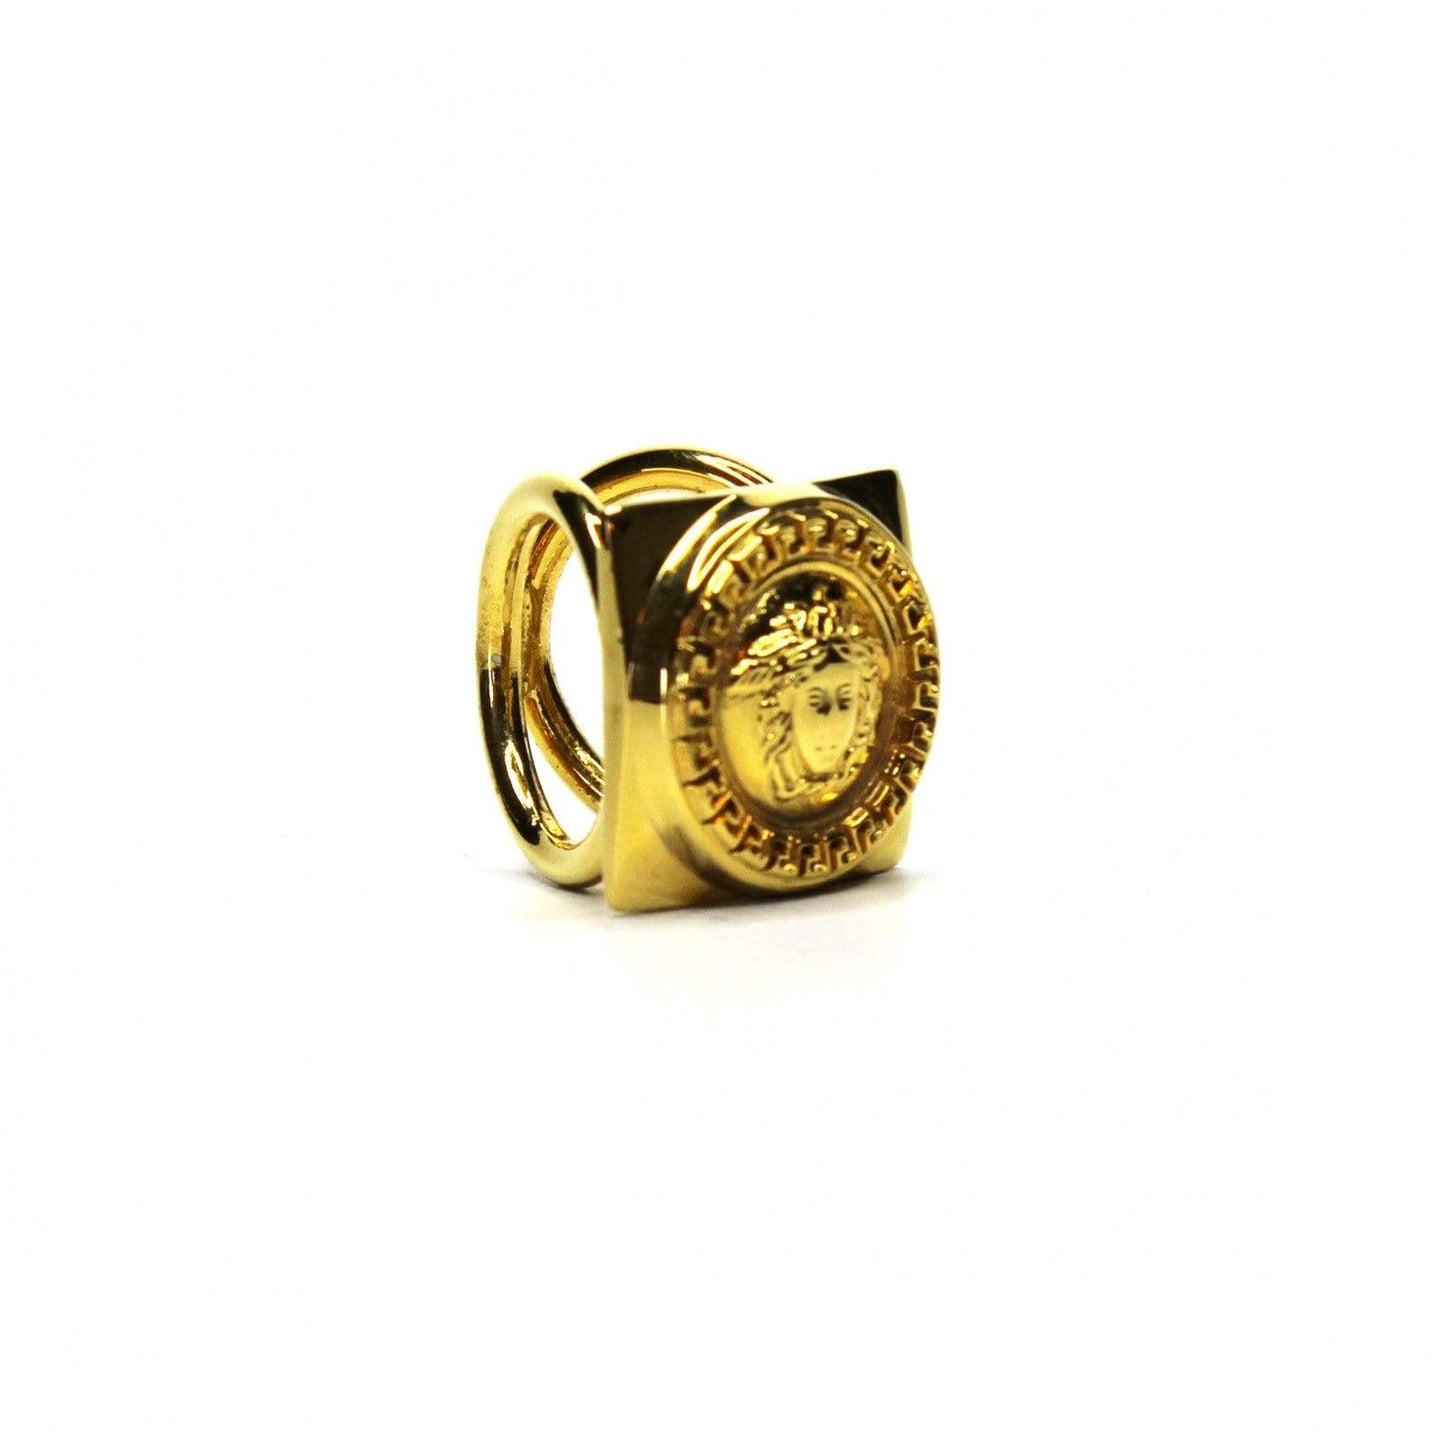 Gianni Versace Square Gold-Tone Medusa Head Adjustable Ring Made in Italy